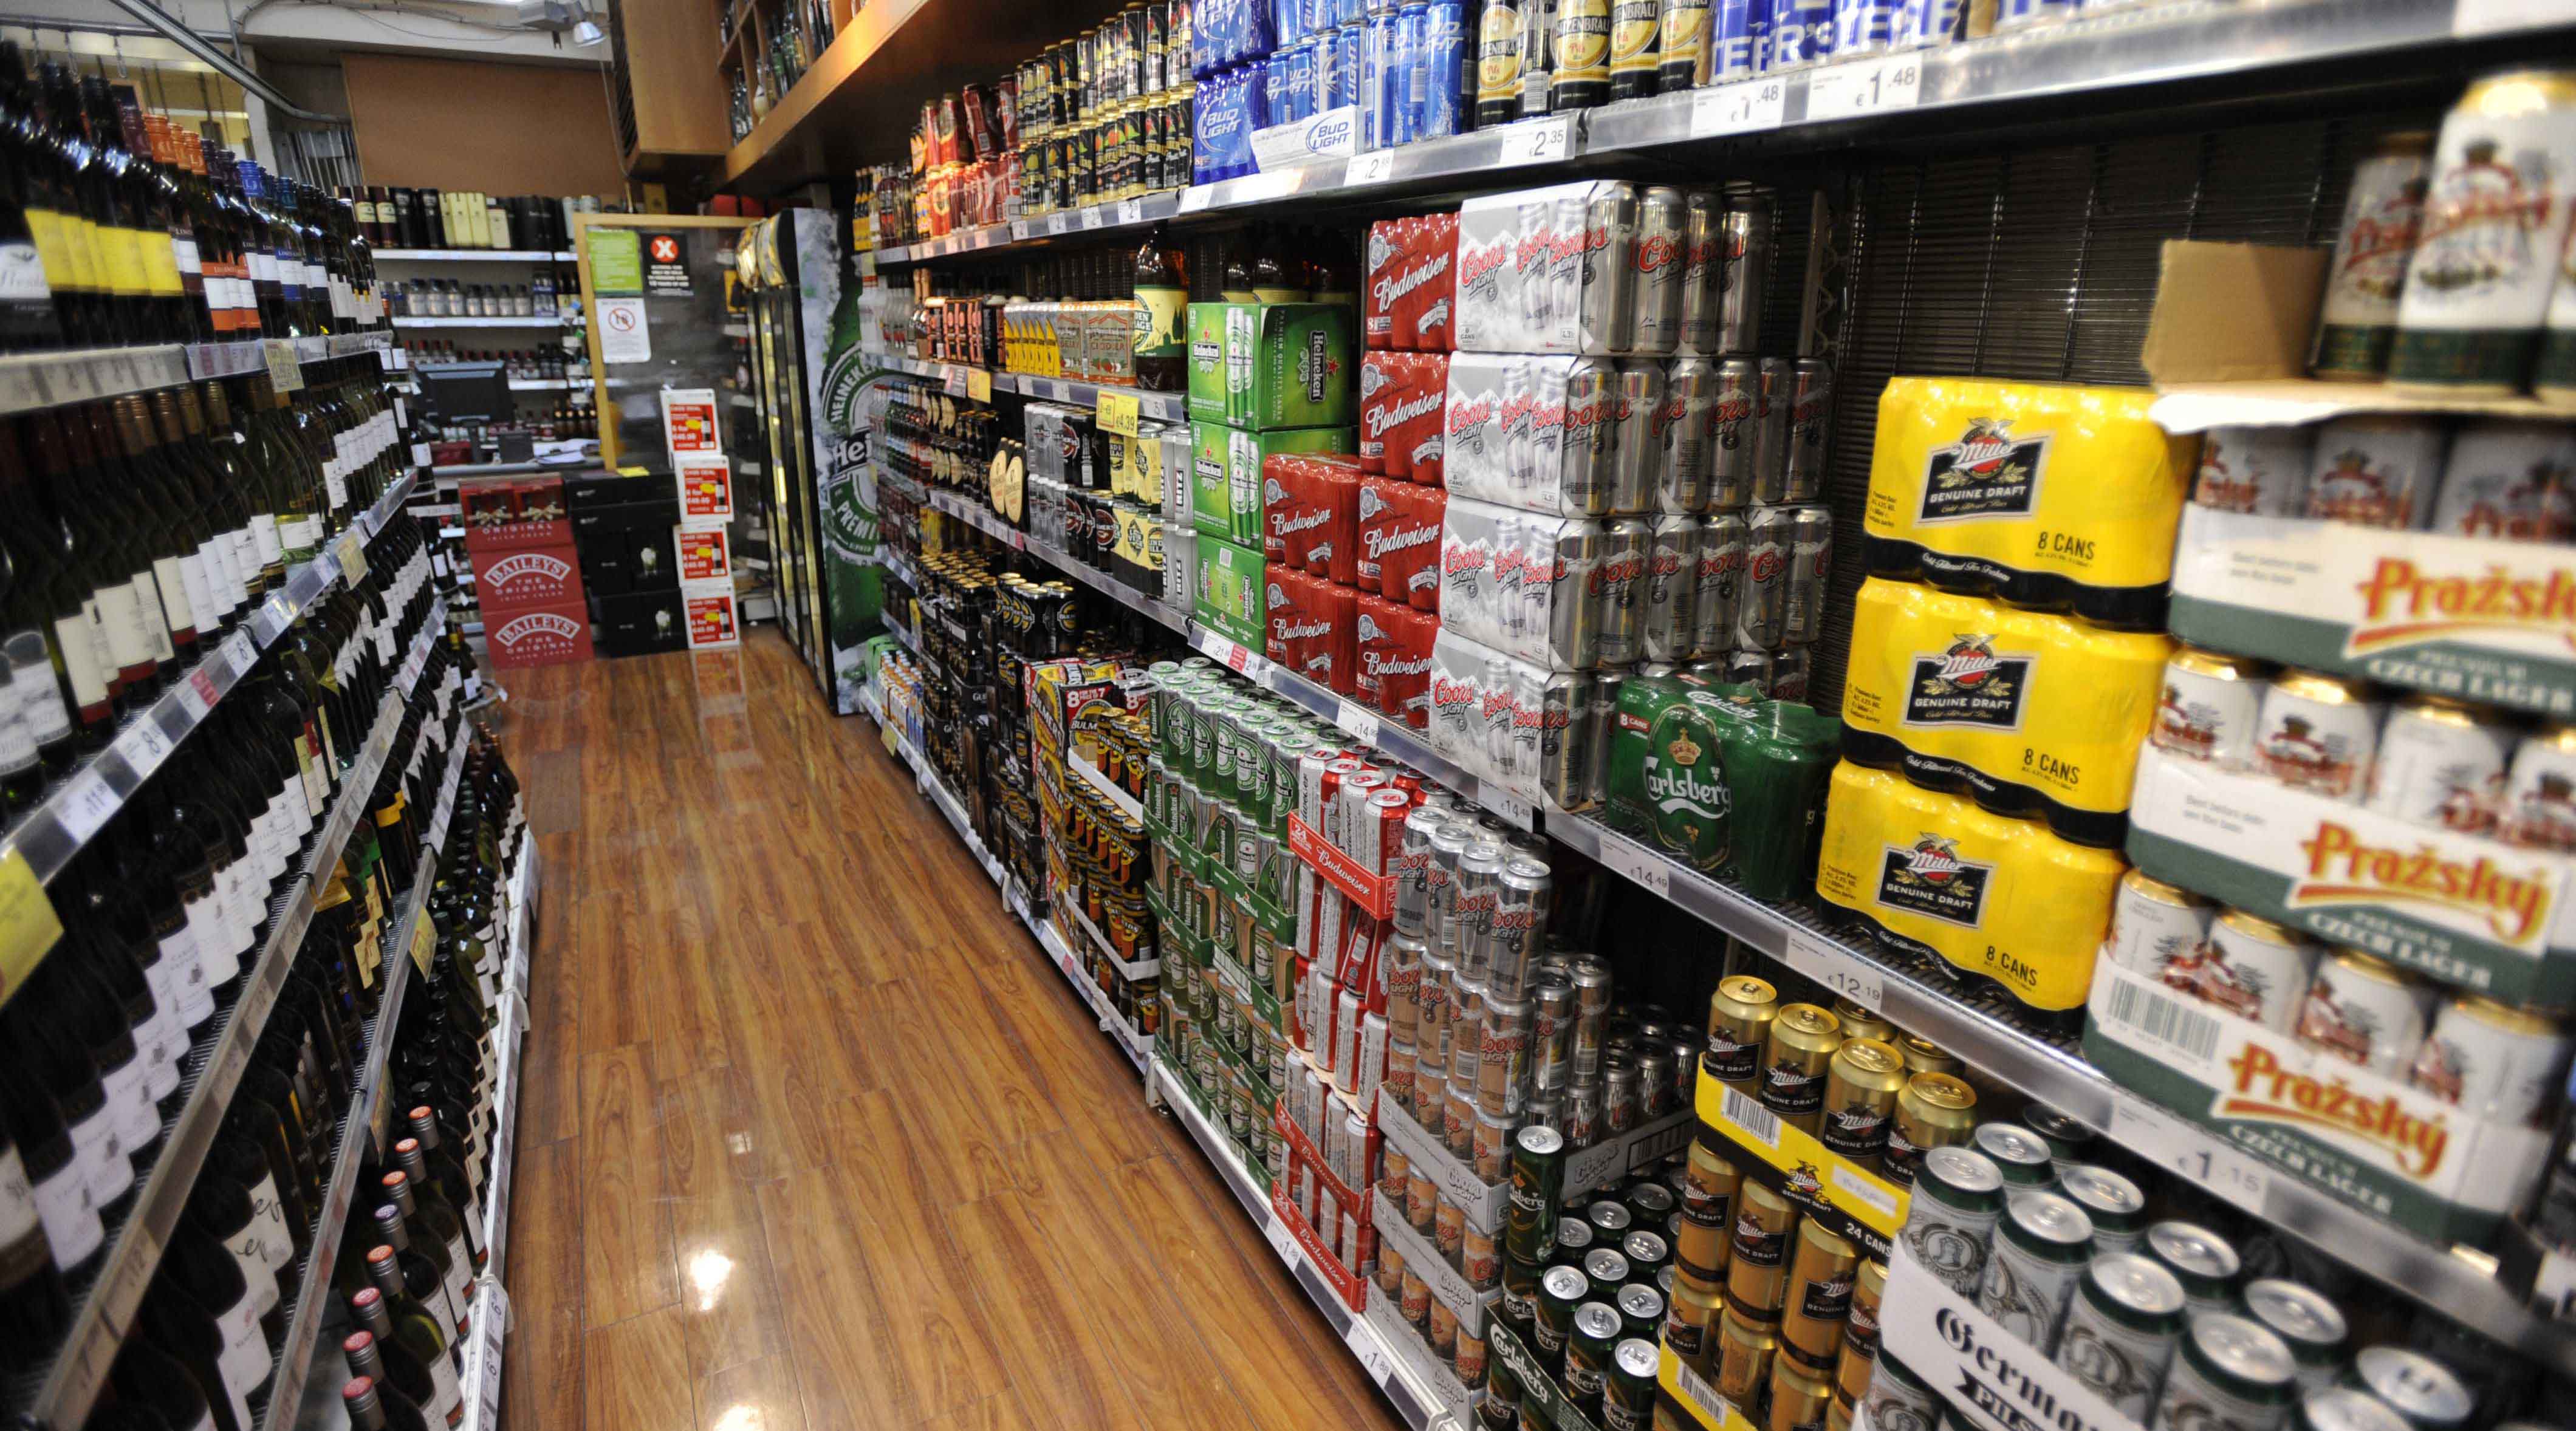 Although alcohol sales showed growth of 18% year-on-year, this growth was behind the growth in other categories although it appeared to be steadily growing week-on-week.